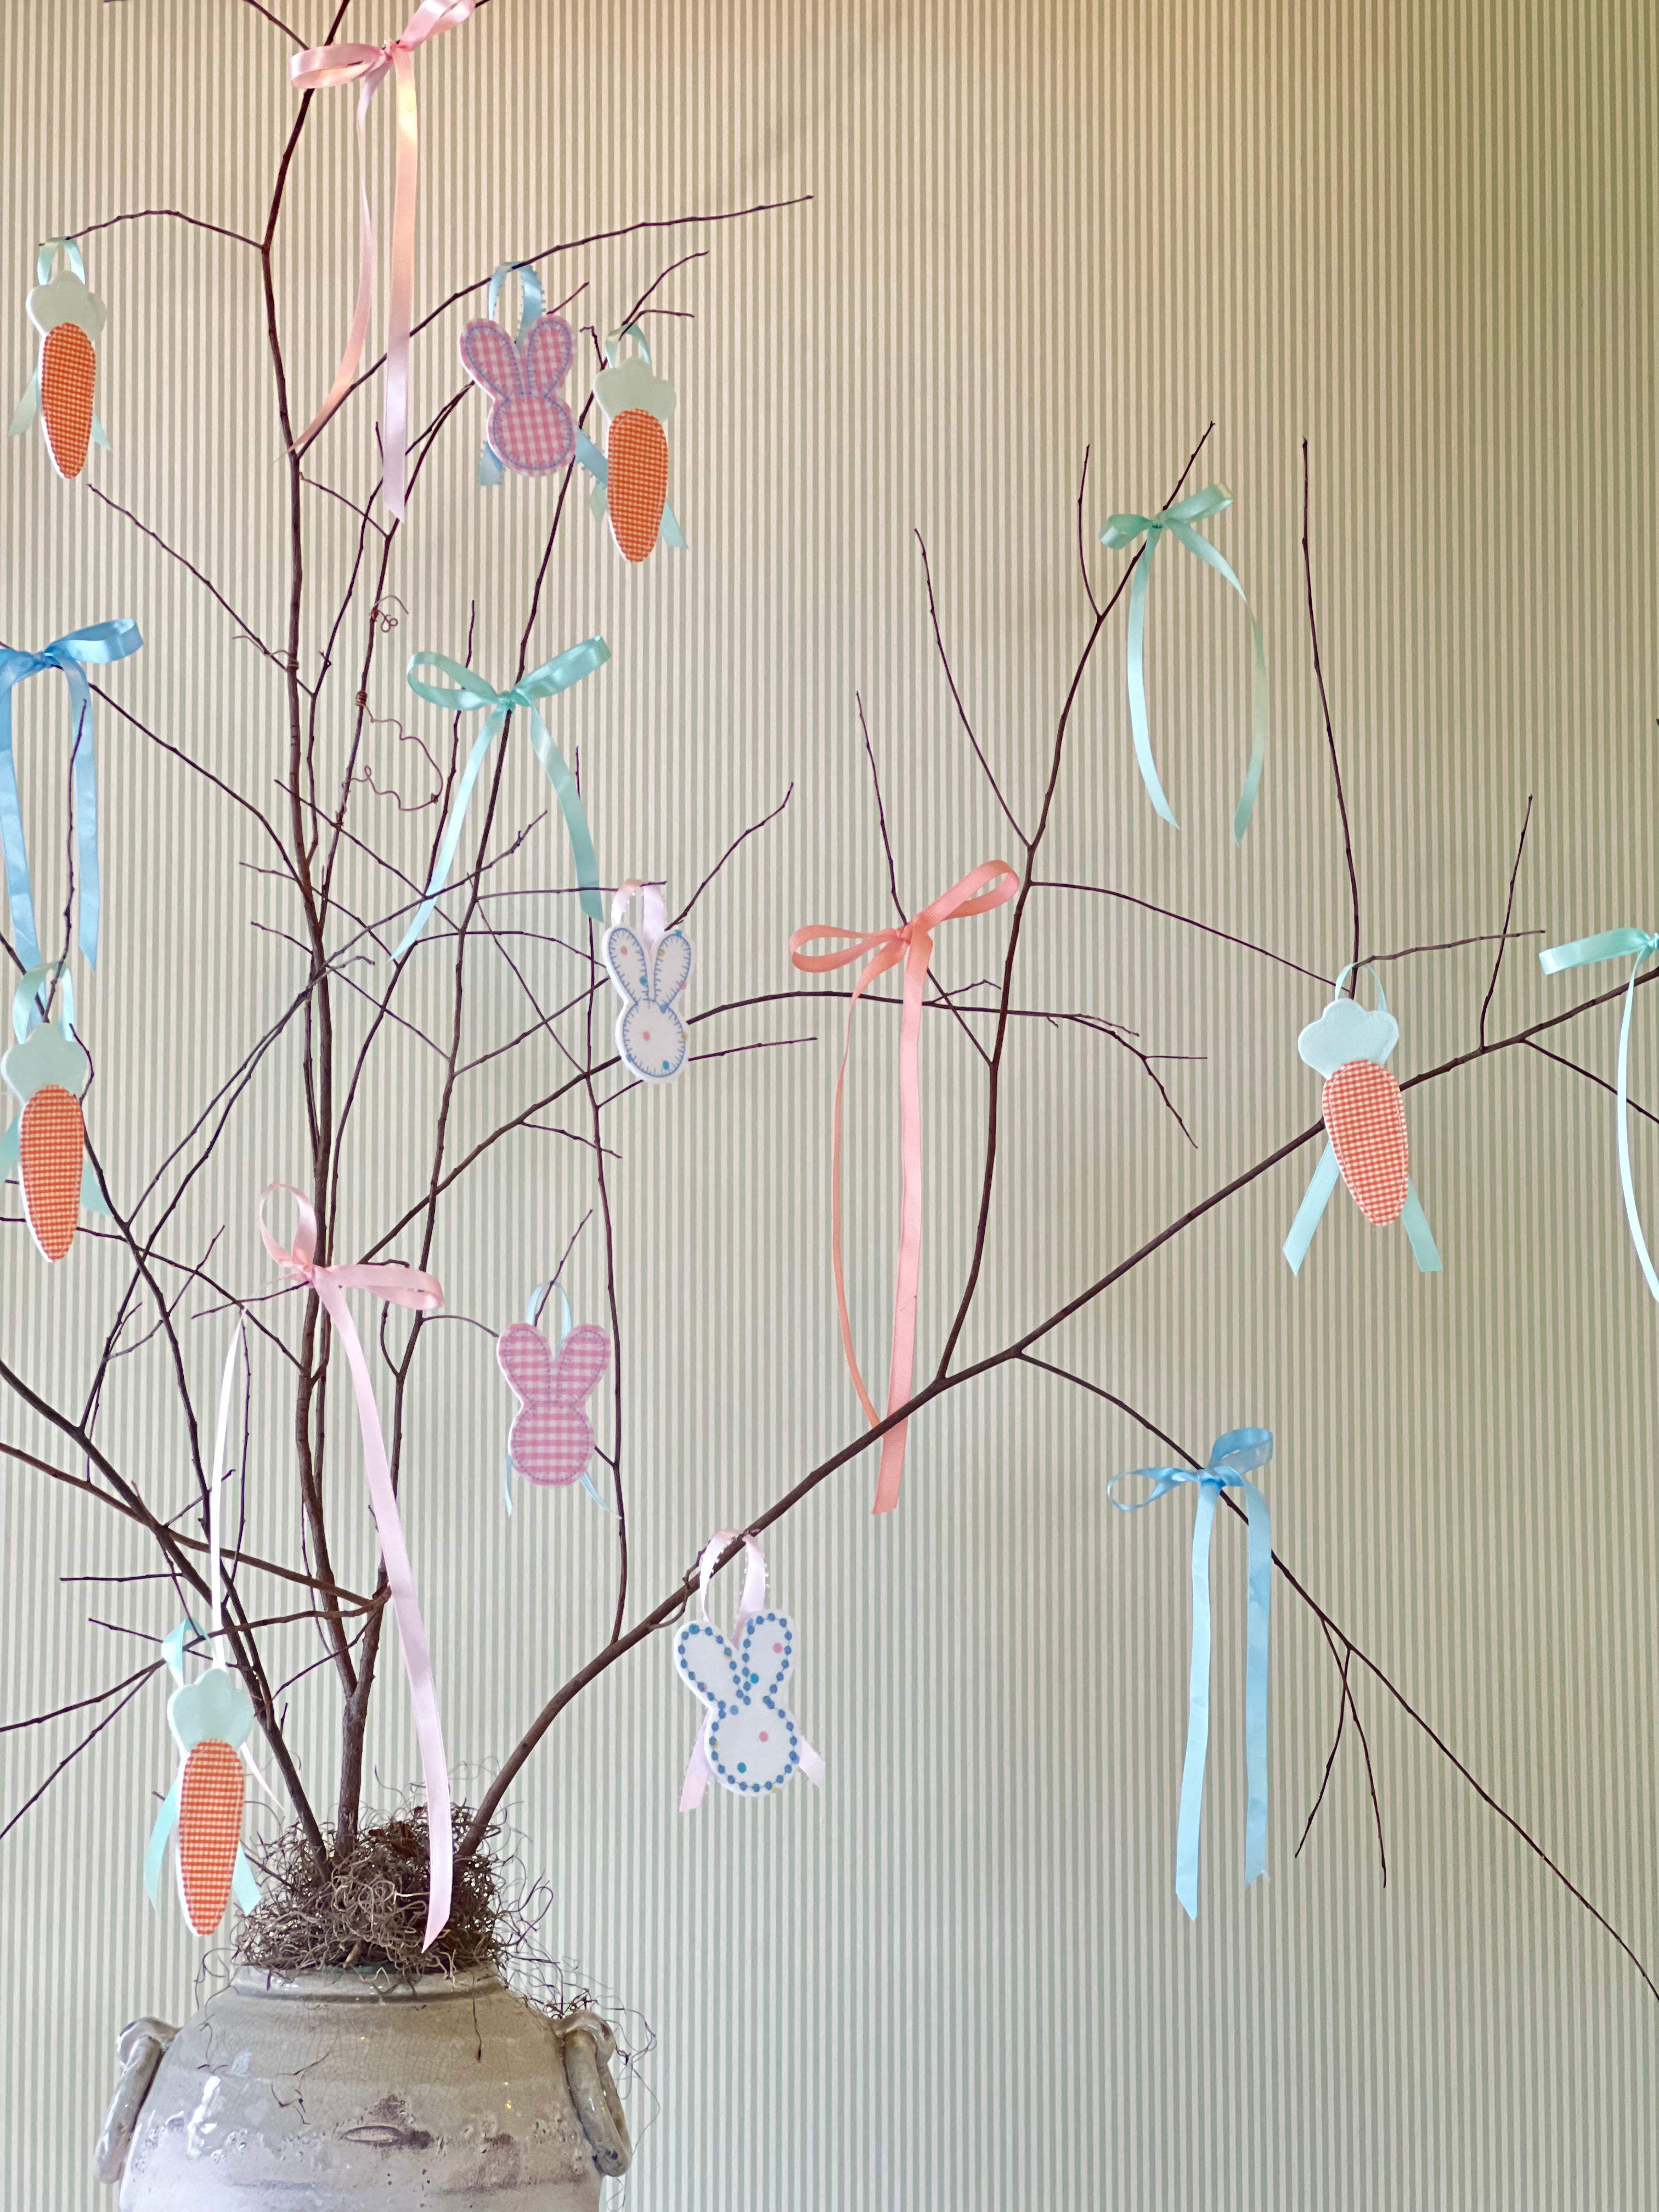 Easter Tree Ornaments